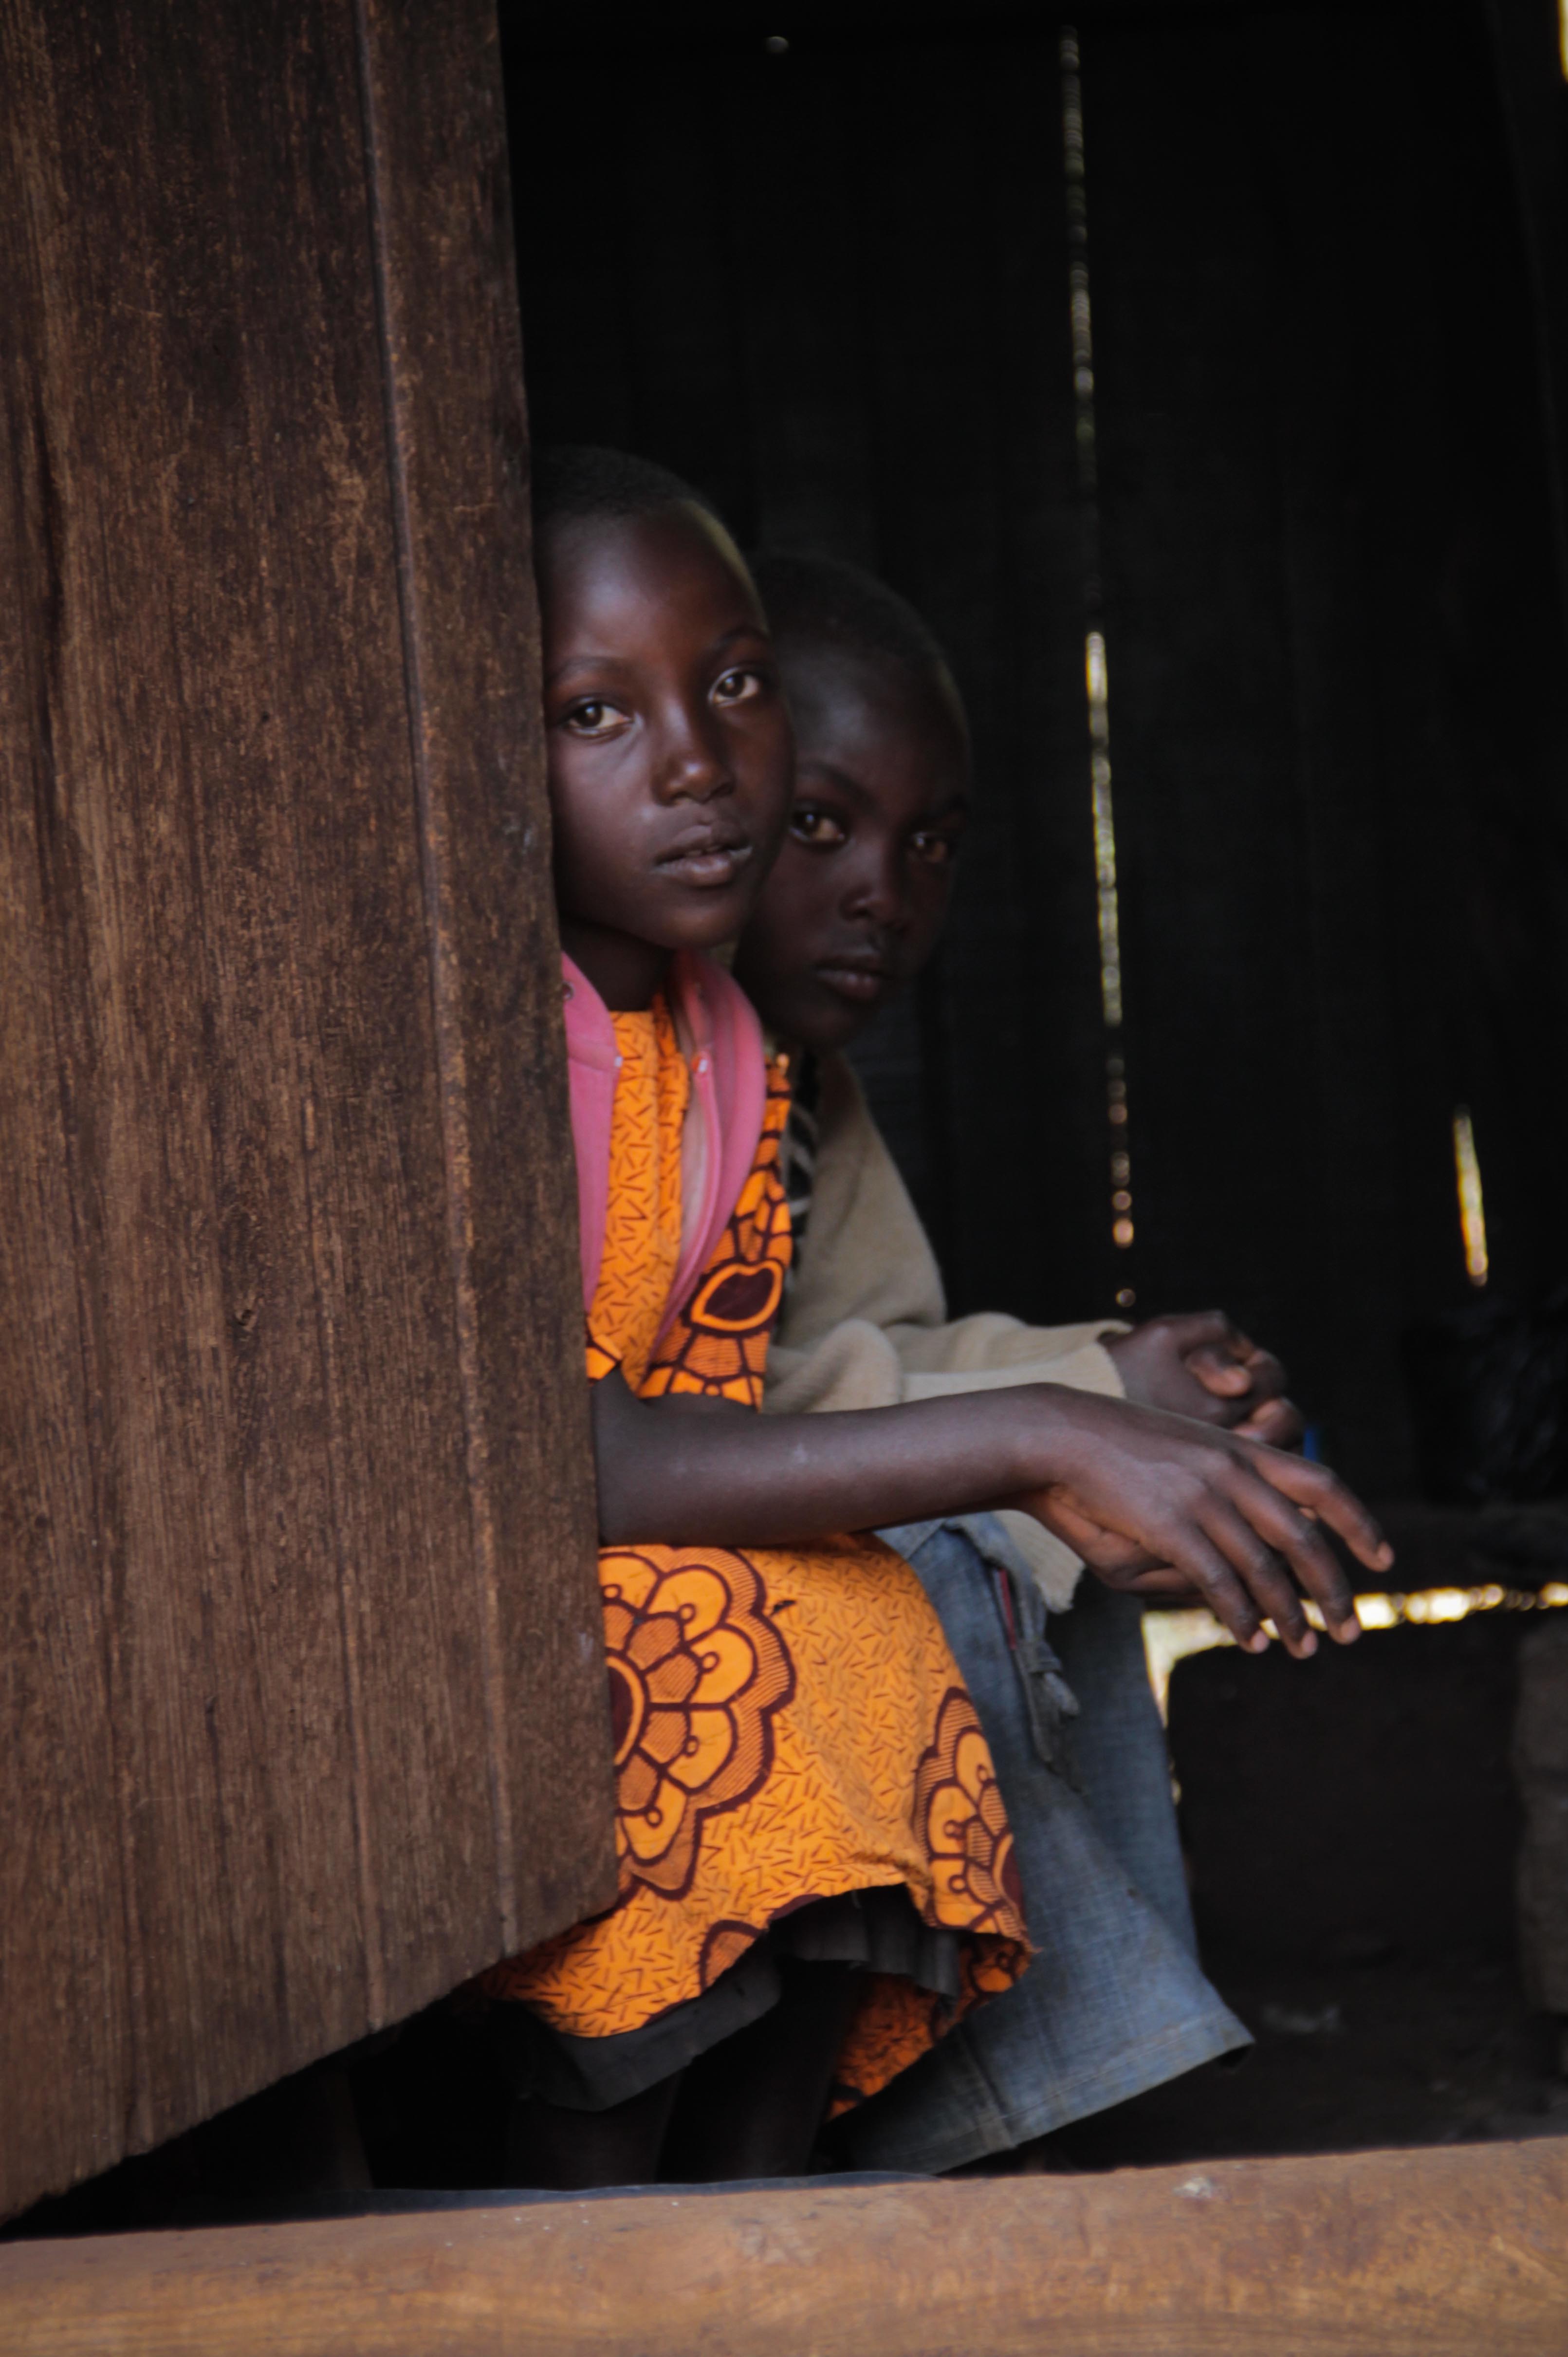 Zipporah's younger sister and brother sit in the shade of their kitchen.